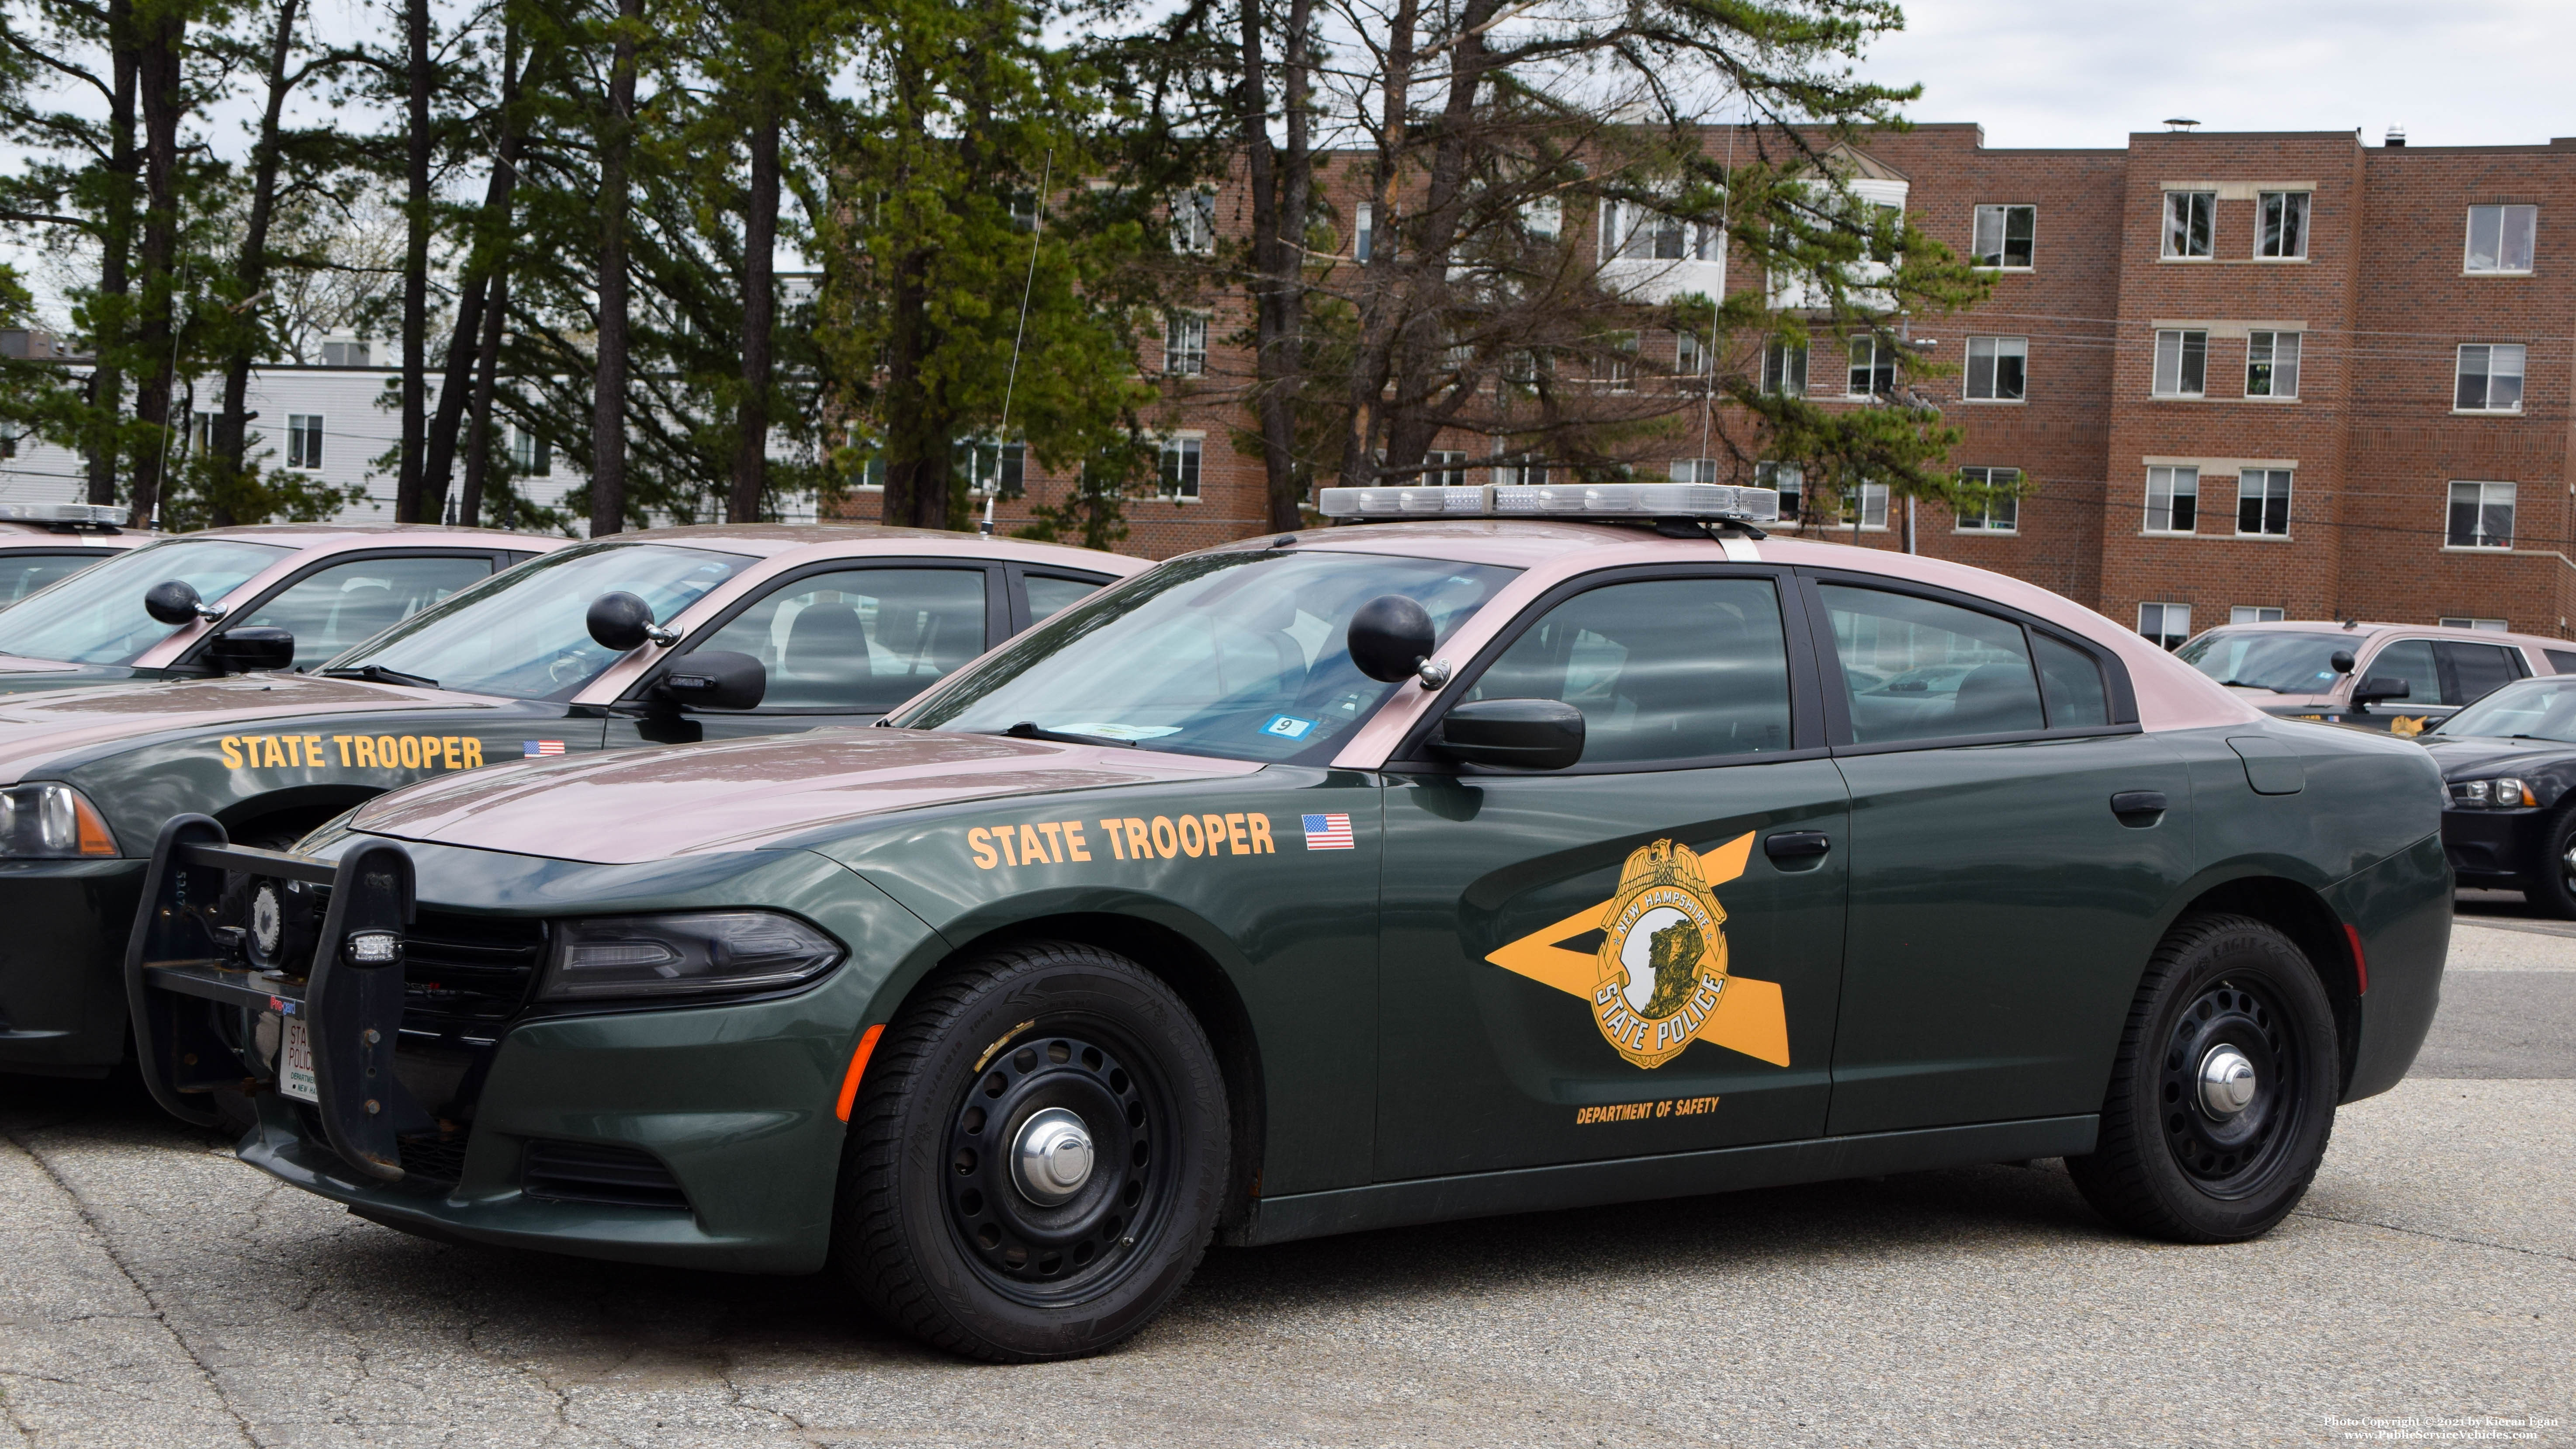 A photo  of New Hampshire State Police
            Cruiser 314, a 2015-2016 Dodge Charger             taken by Kieran Egan